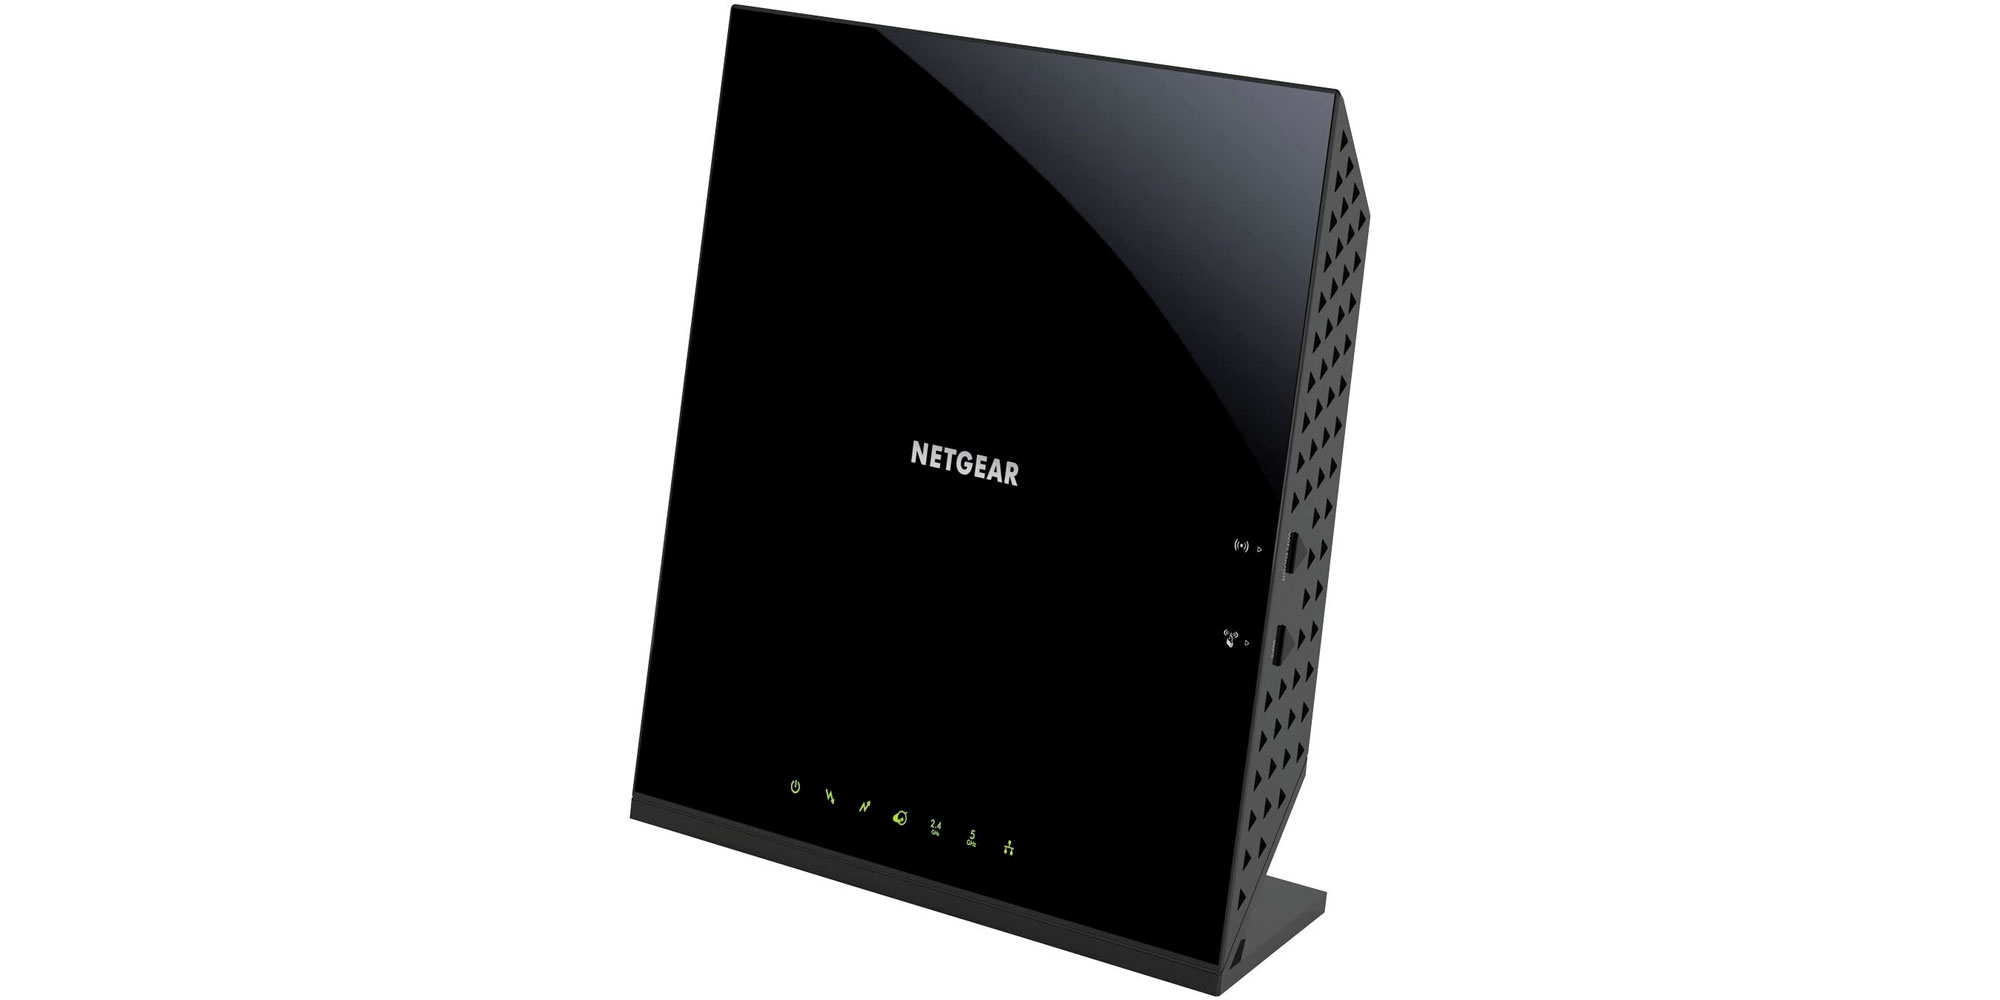 buy modem and router combo